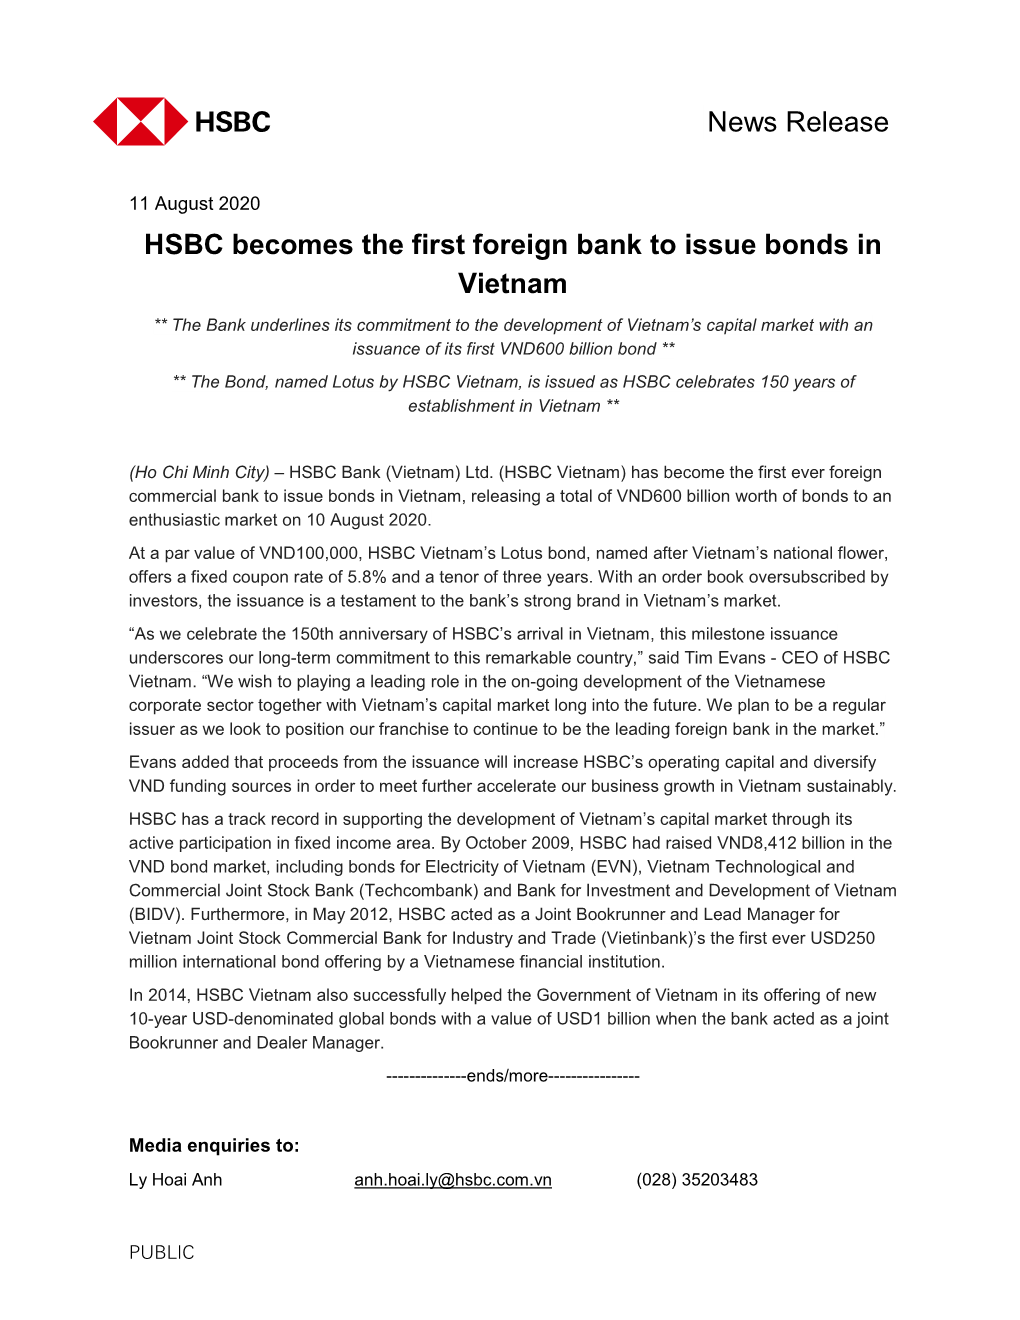 HSBC Becomes the First Foreign Bank to Issue Bonds in Vietnam